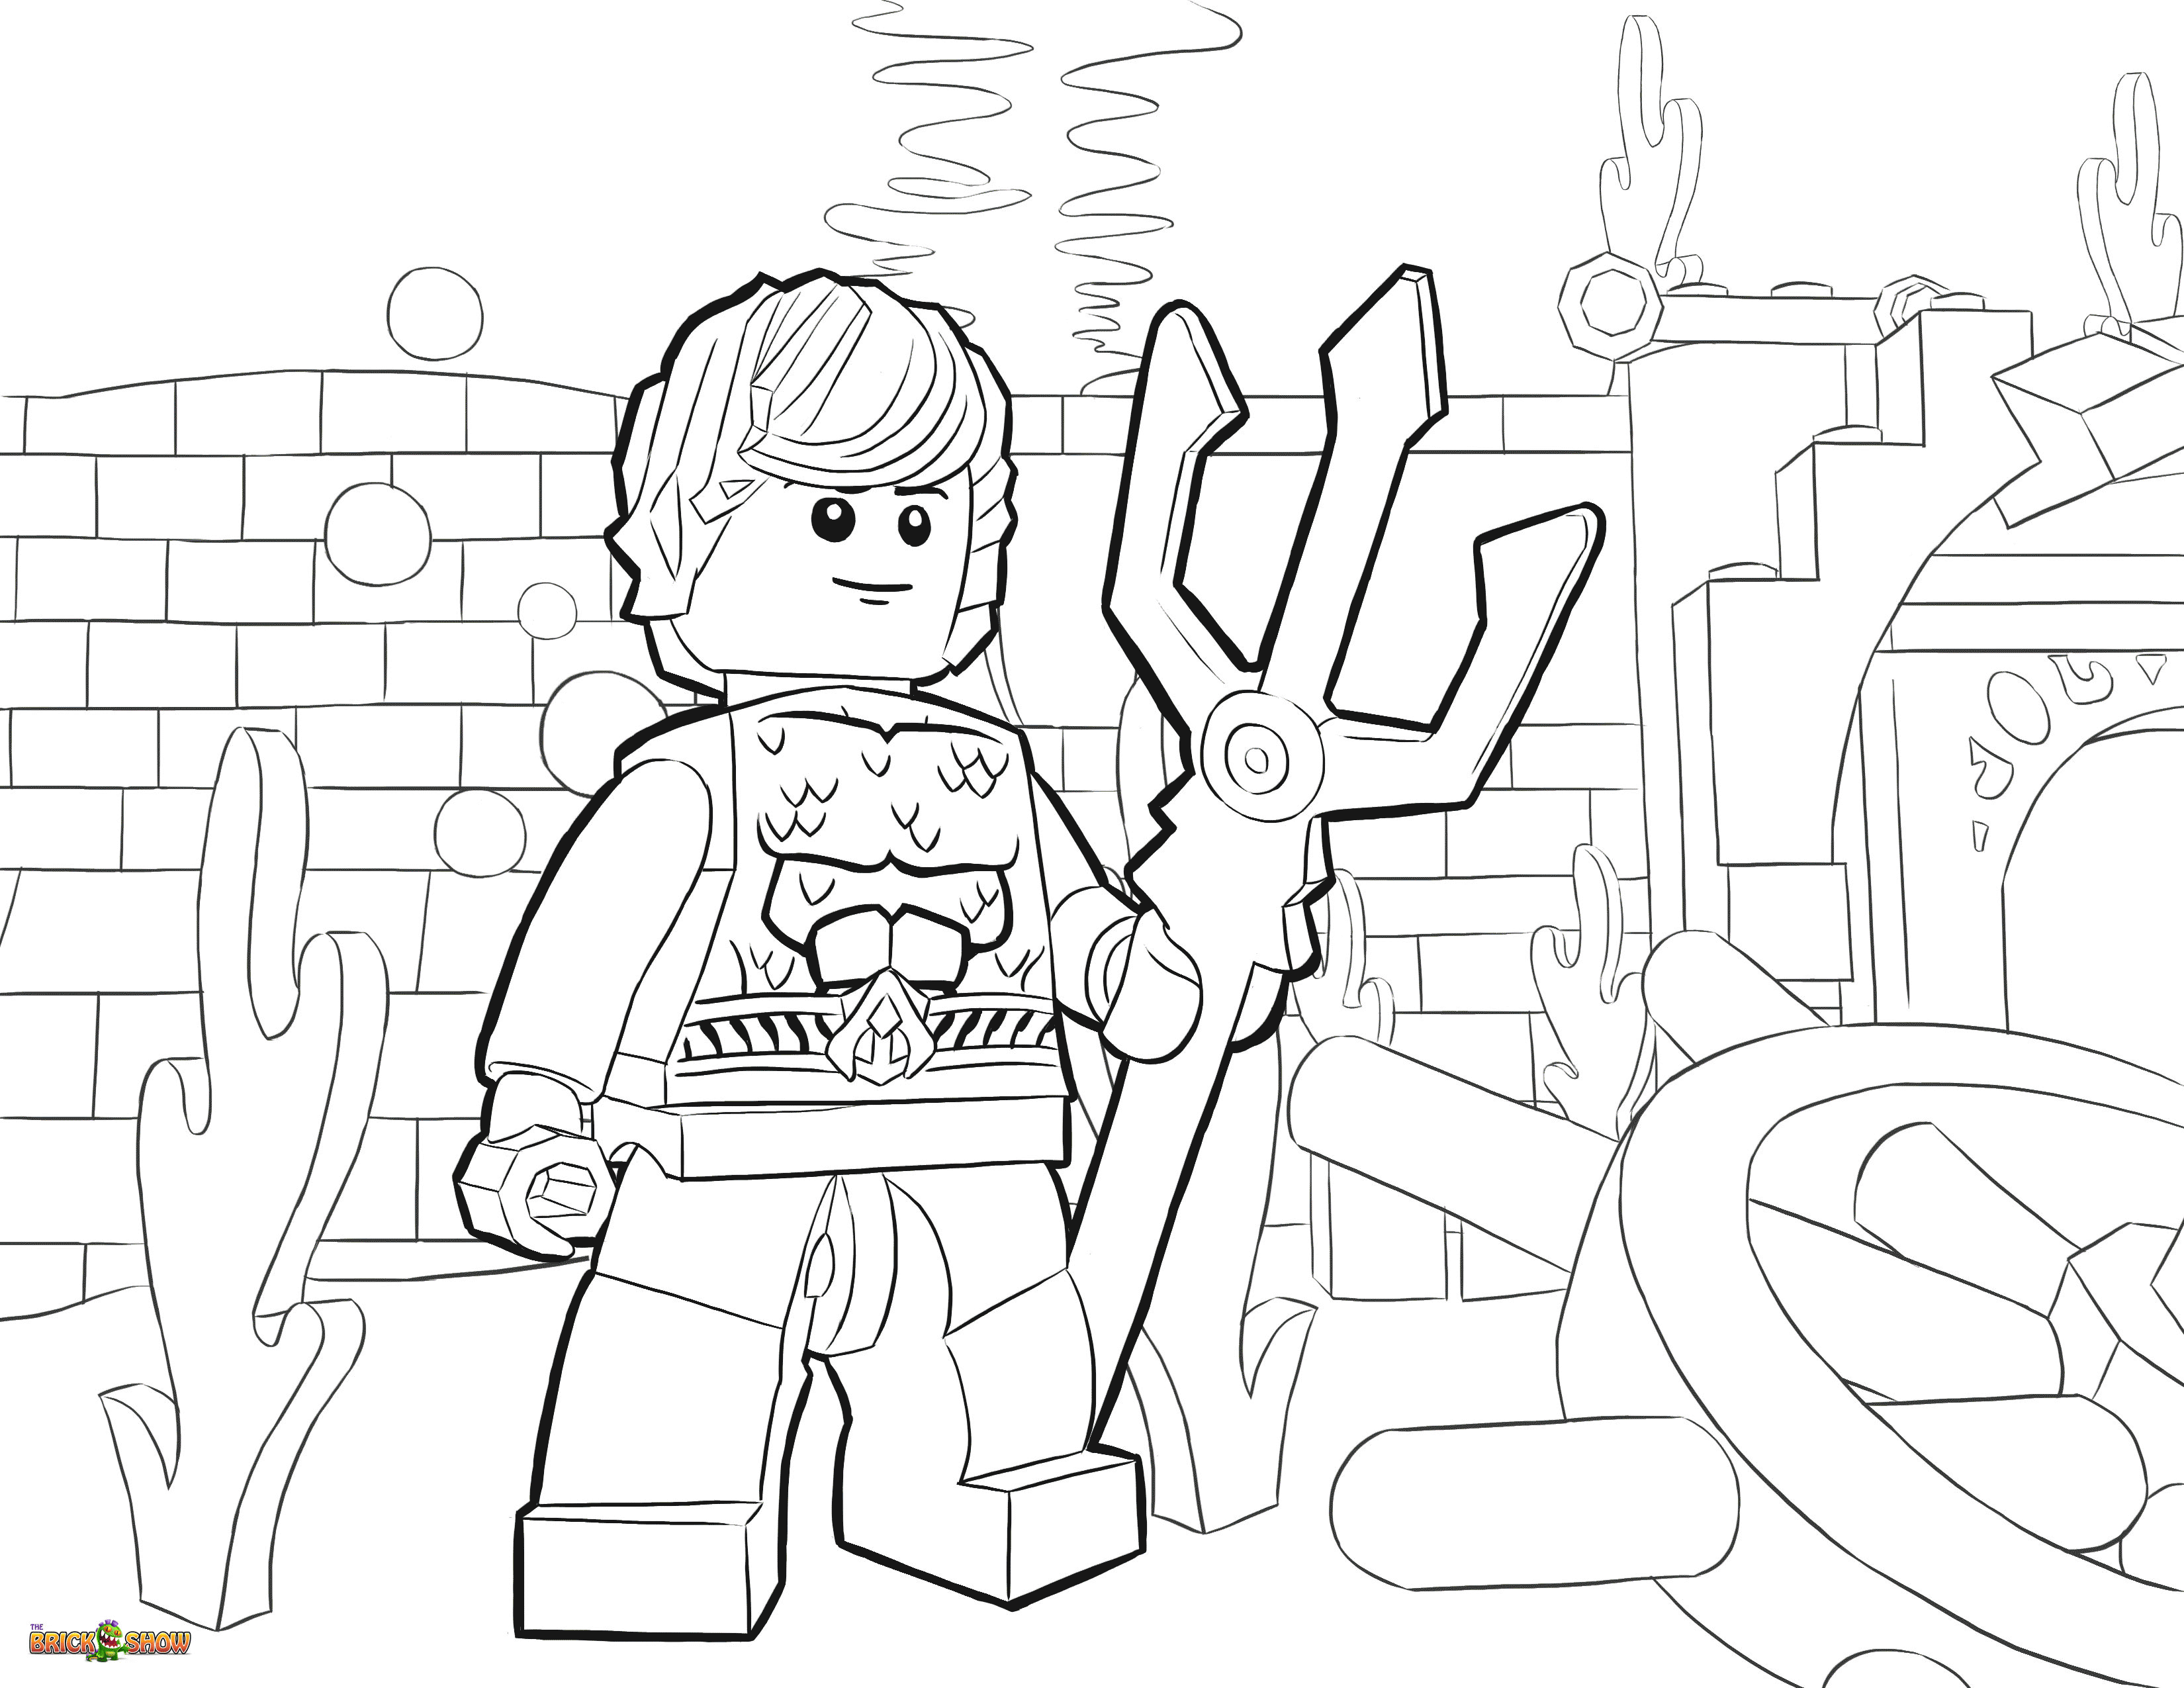 Download Avengers Lego Coloring Pages - Coloring Home